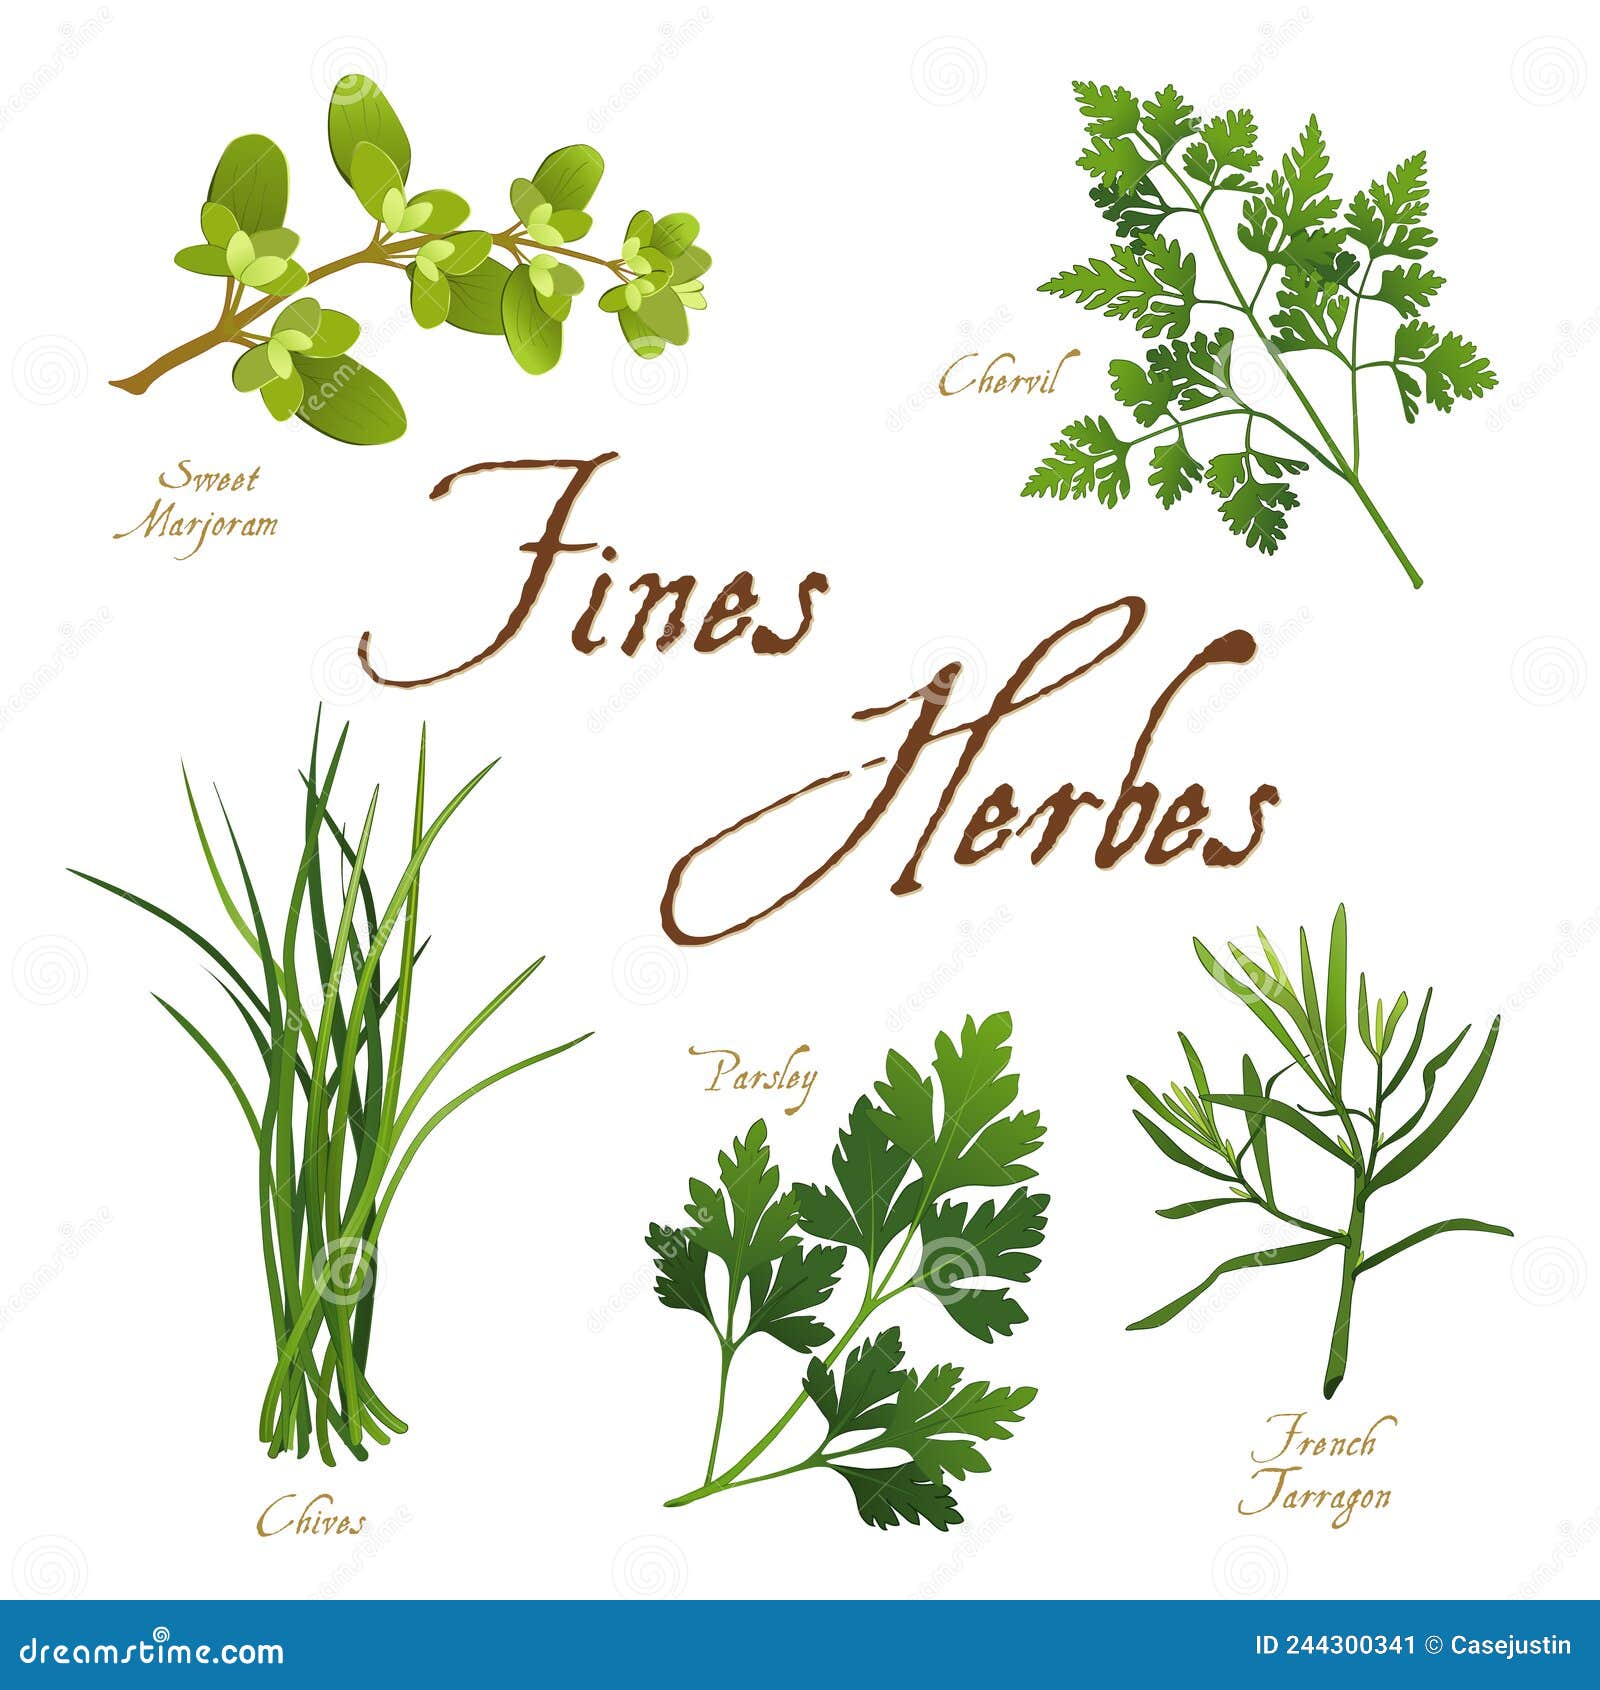 fines herbes, french herb blend